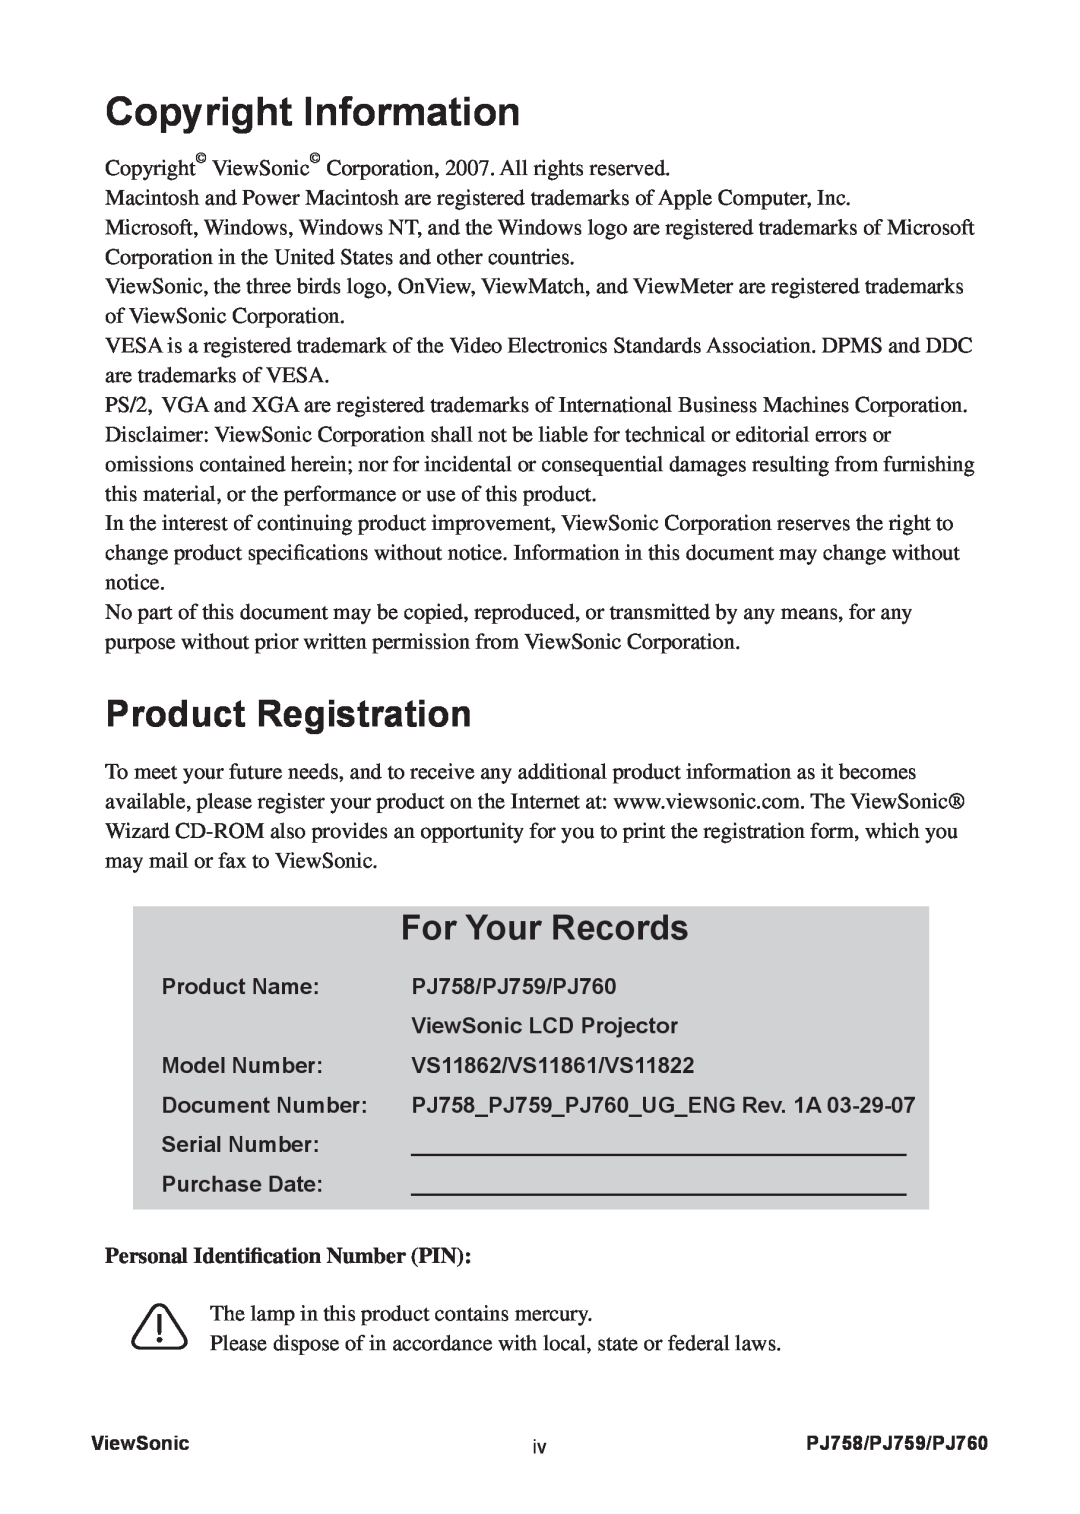 ViewSonic PJ758/PJ759/PJ760 Product Registration, For Your Records, Copyright Information, Product Name, Model Number 